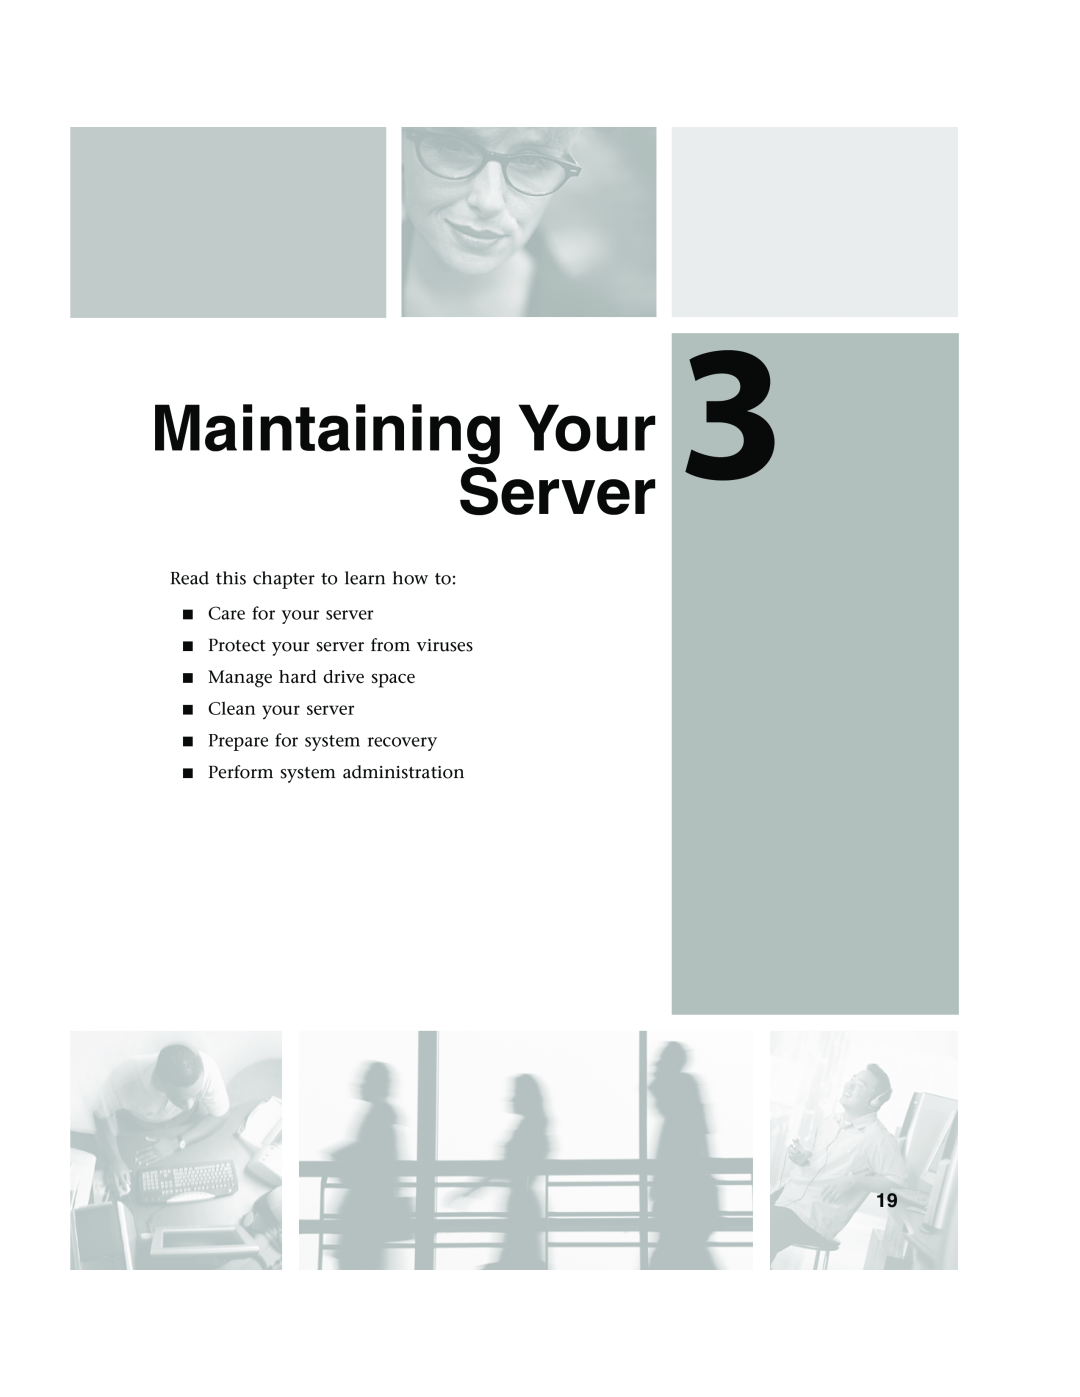 Gateway 960 MaintainingServerYour, Read this chapter to learn how to Care for your server, Perform system administration 